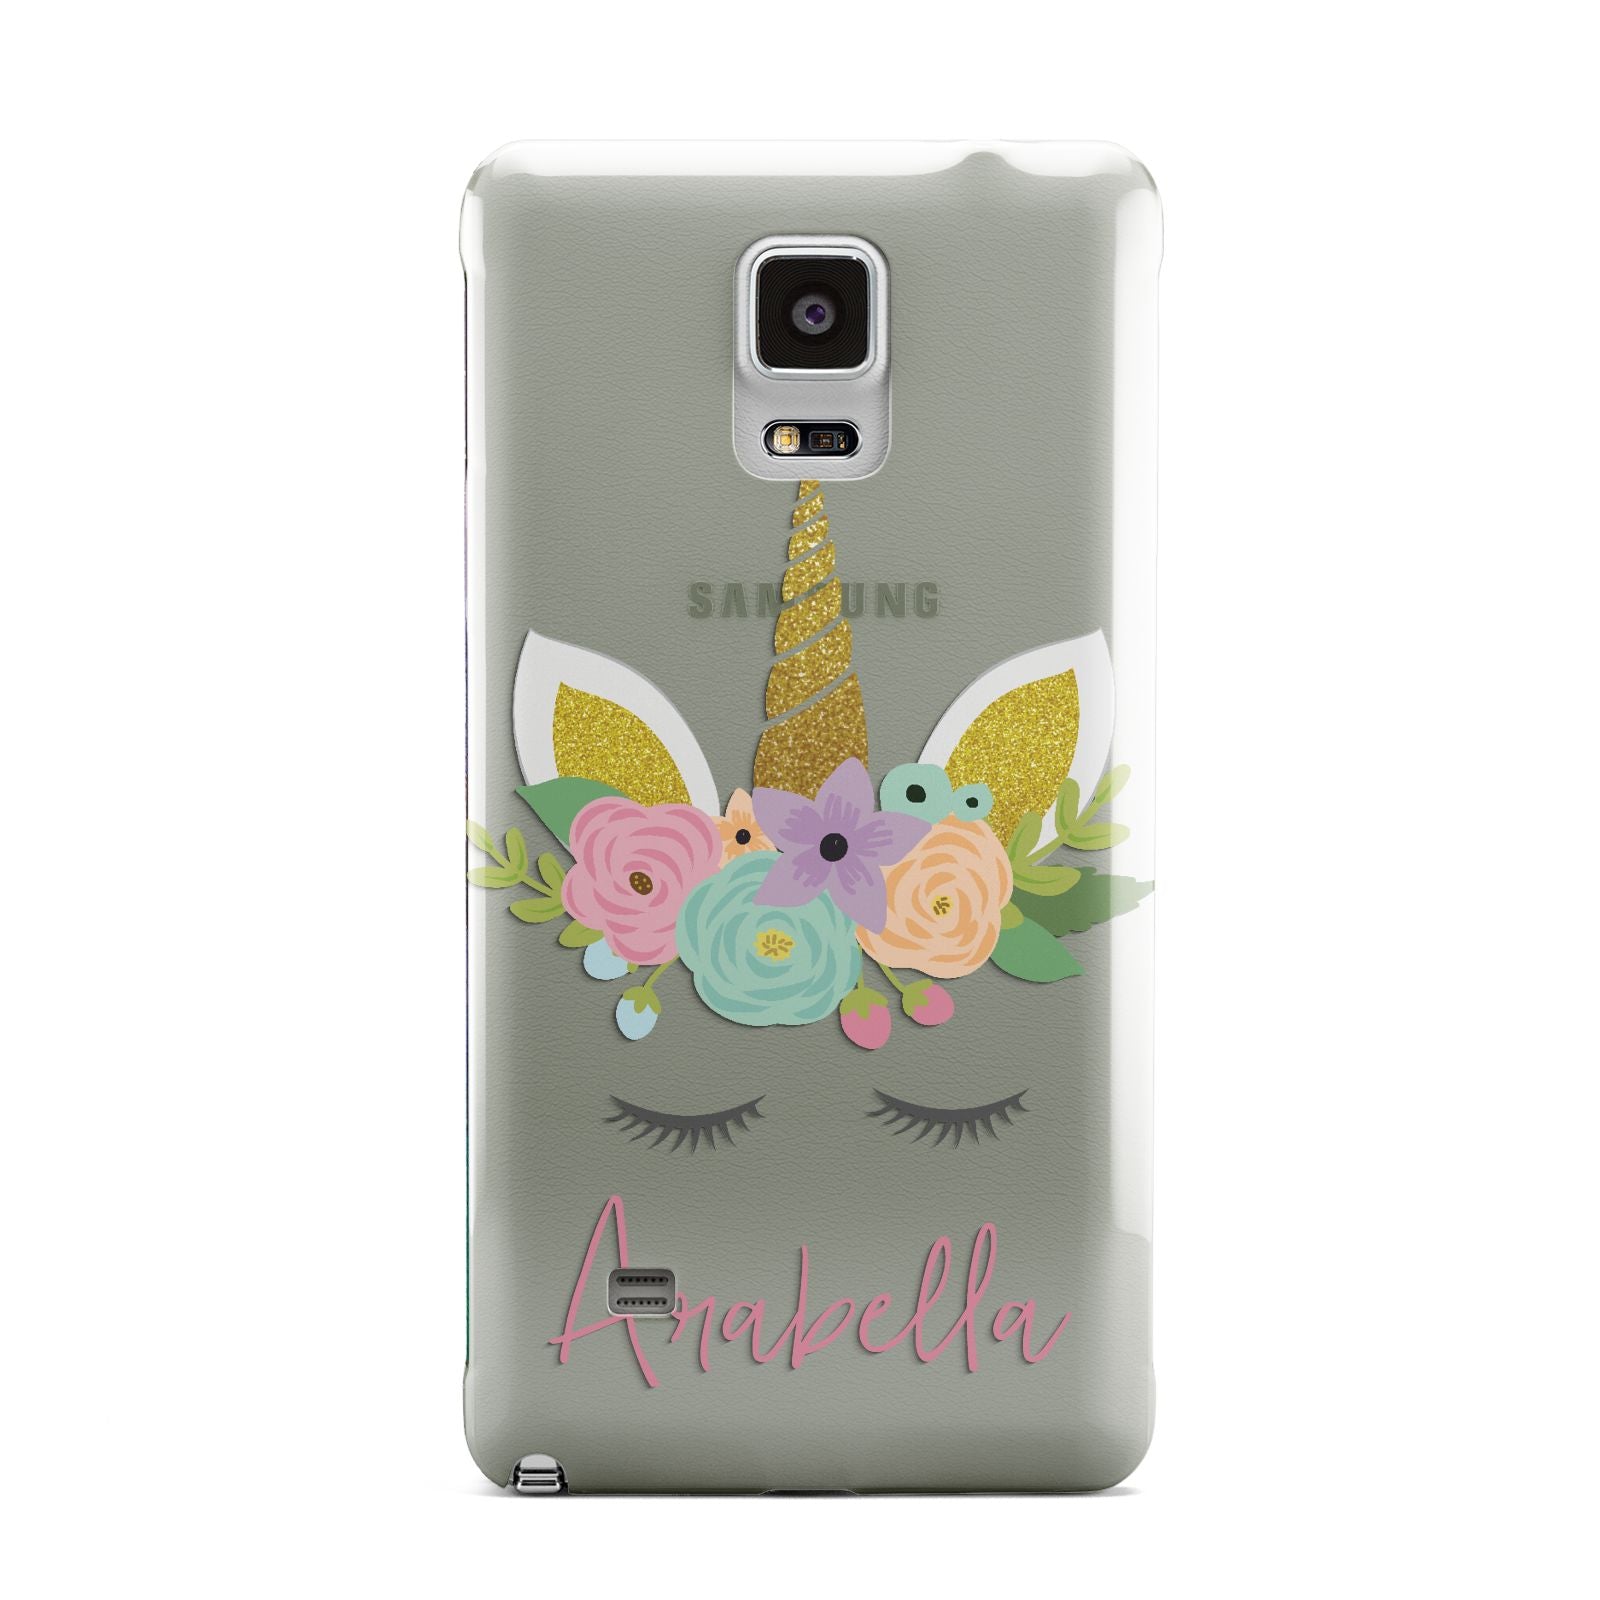 Personalised Unicorn Face Samsung Galaxy Note 4 Case